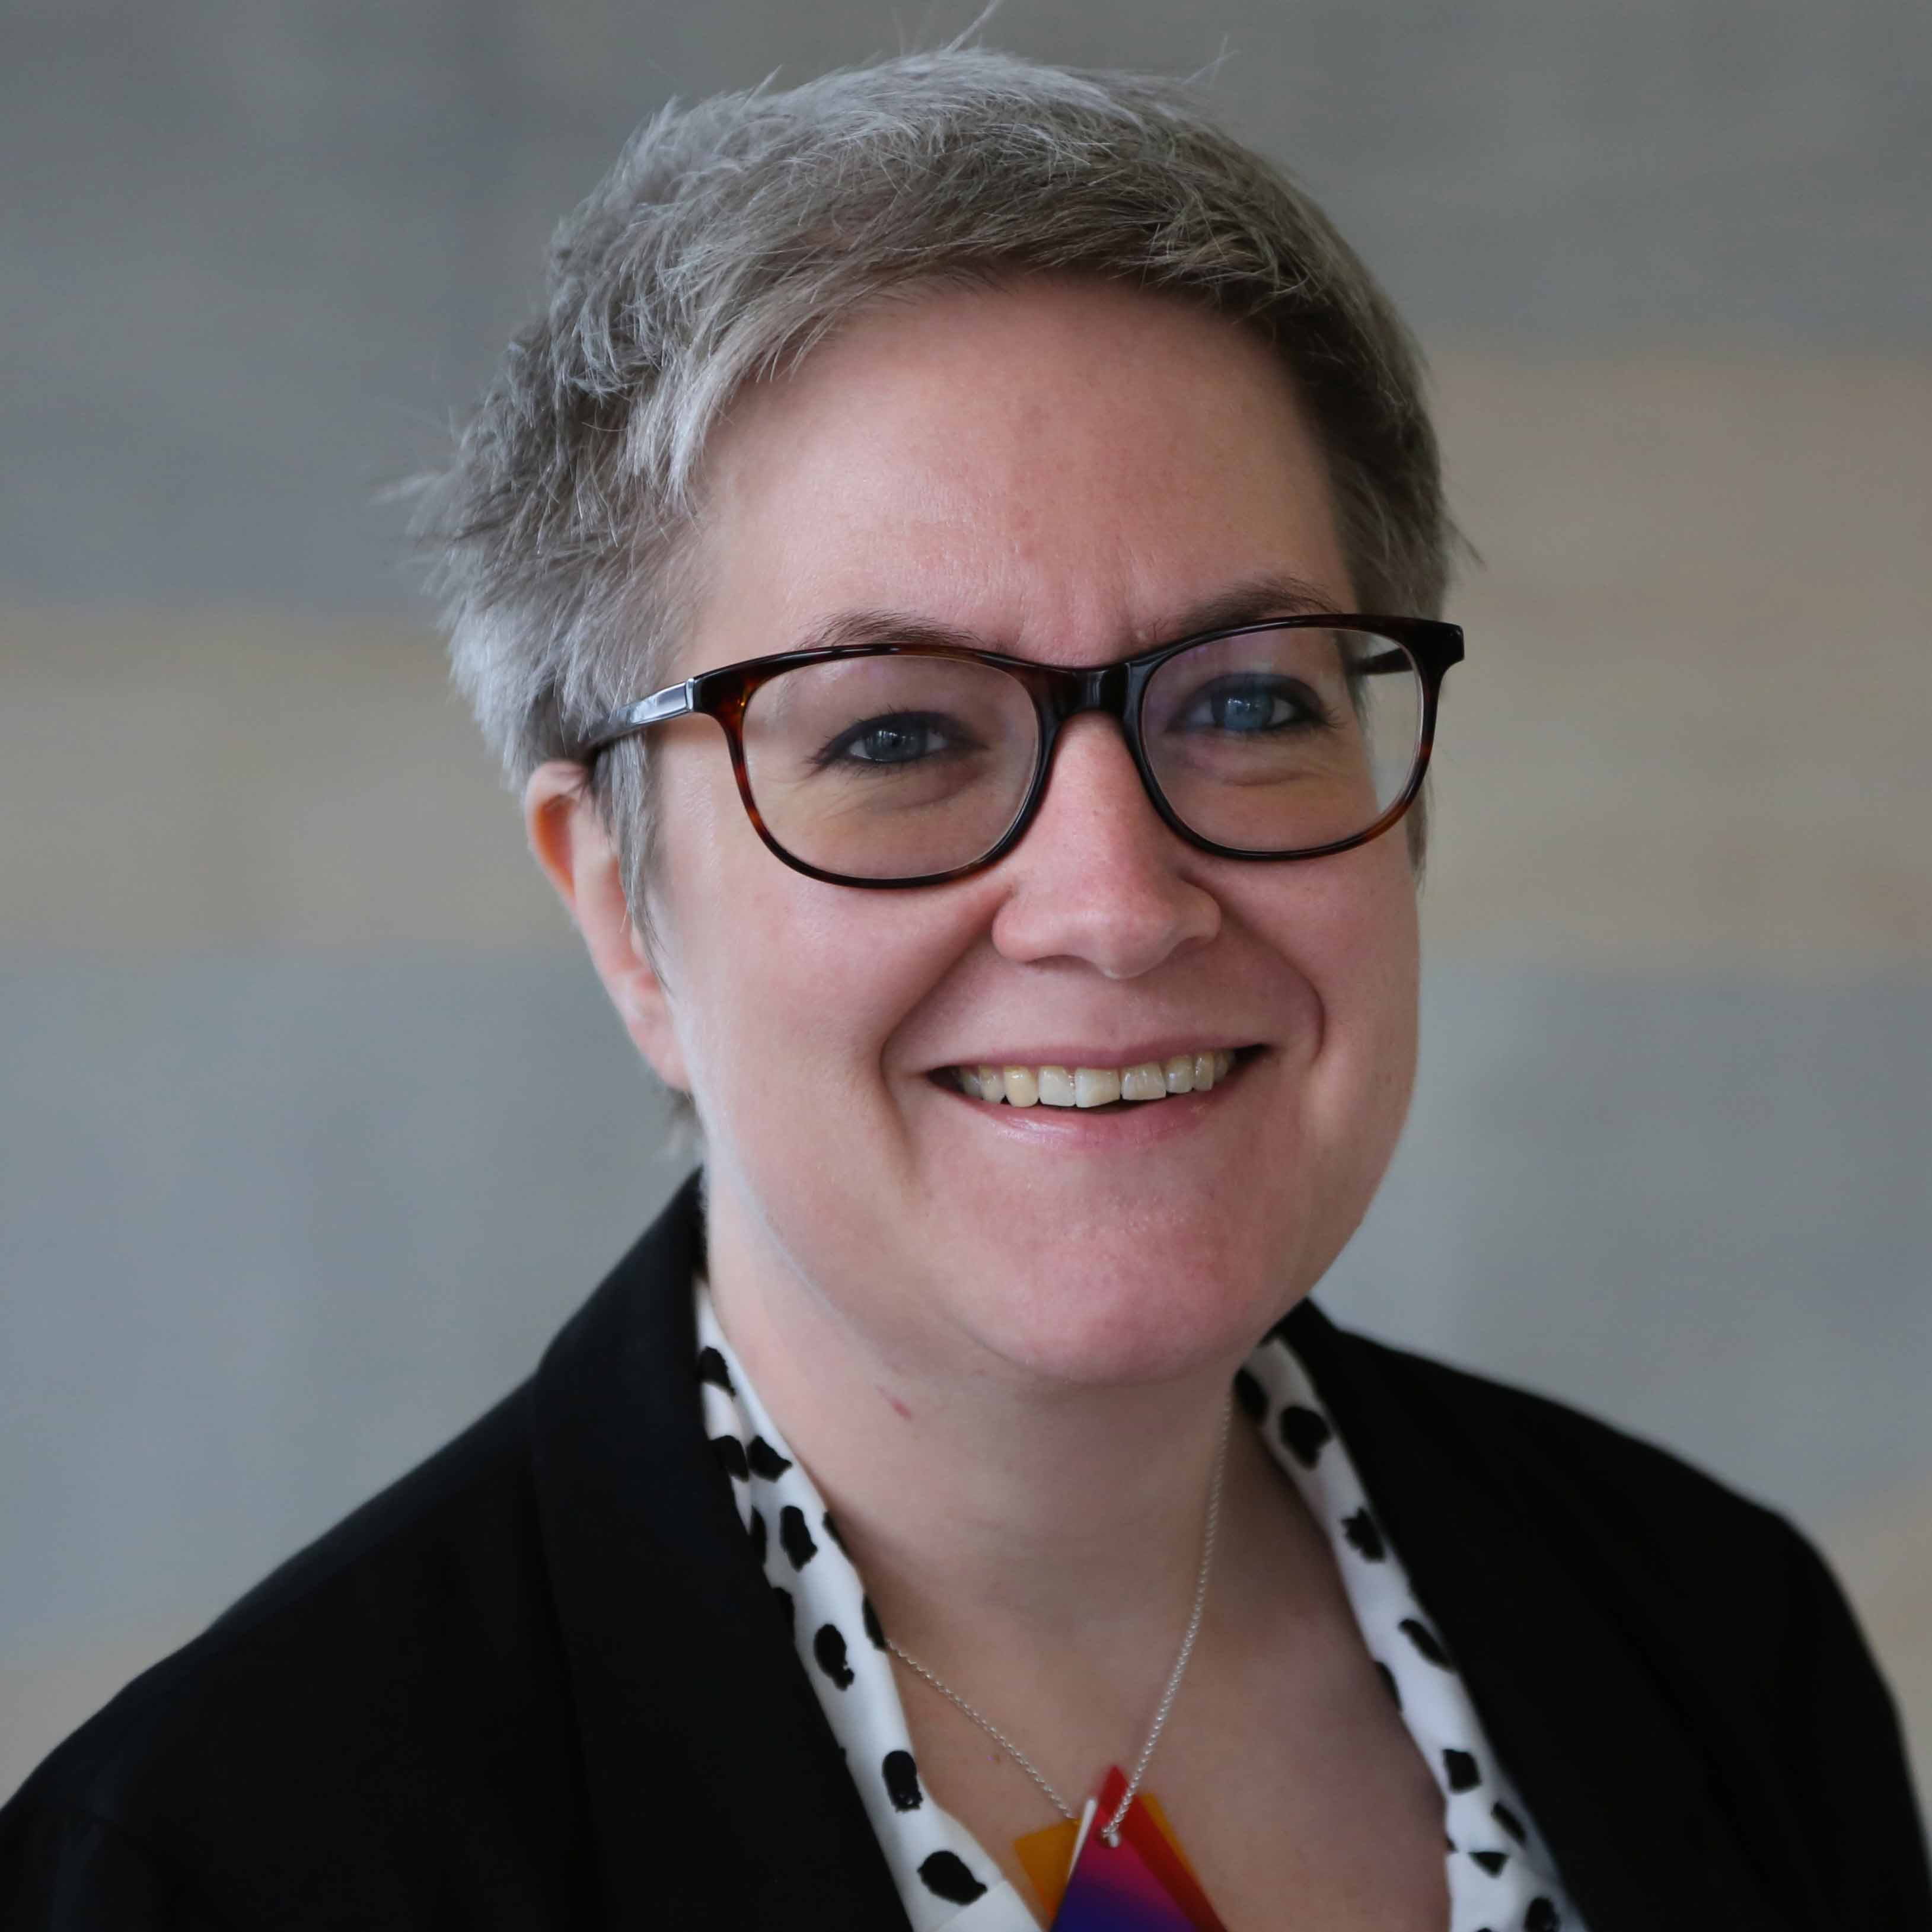 Portrait of Professor Tracey Loughran, smiling and wearing dark rimmed glasses